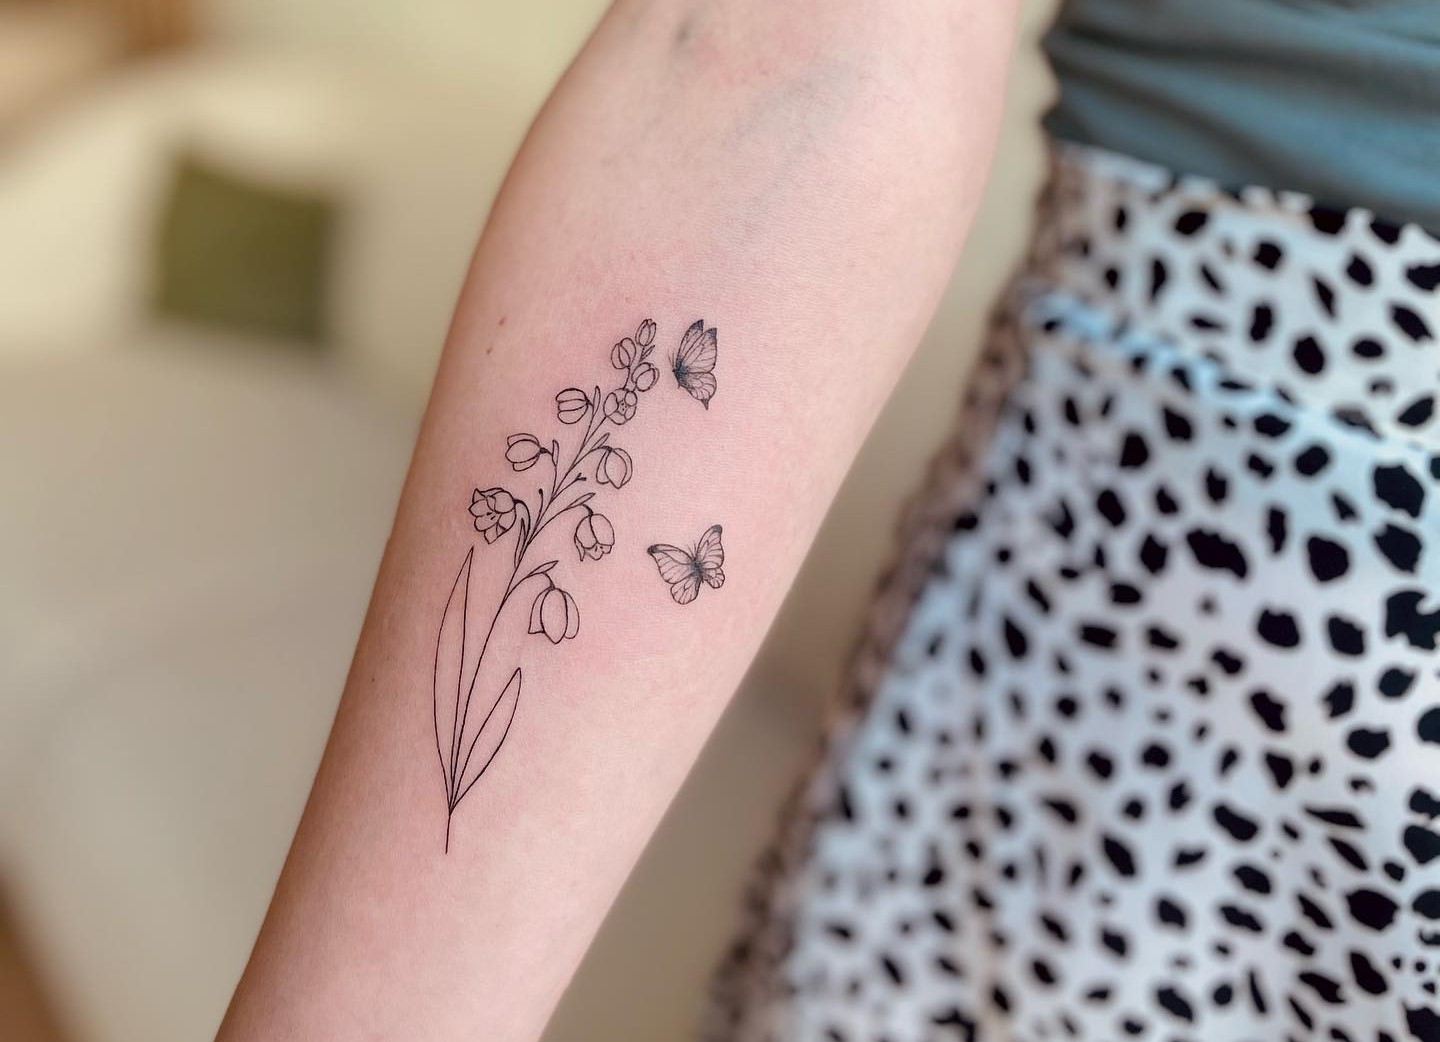 Lily of the valley tattoo located on the ankle